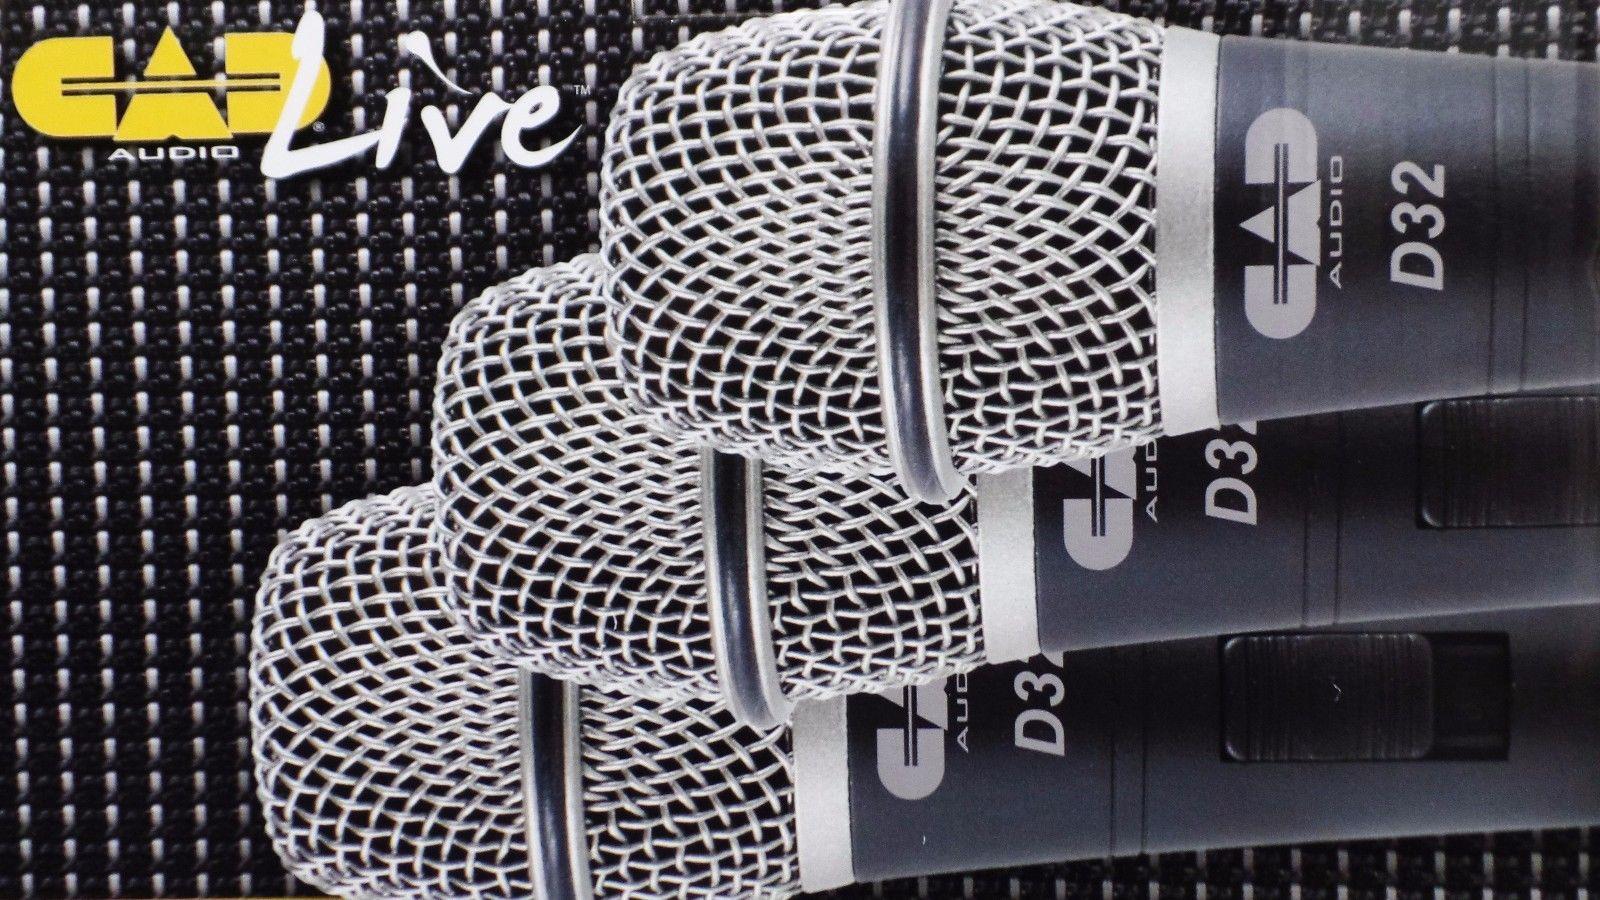 CAD Audio D32X D32 Supercardioid Dynamic Vocal Microphone by CAD Aud 